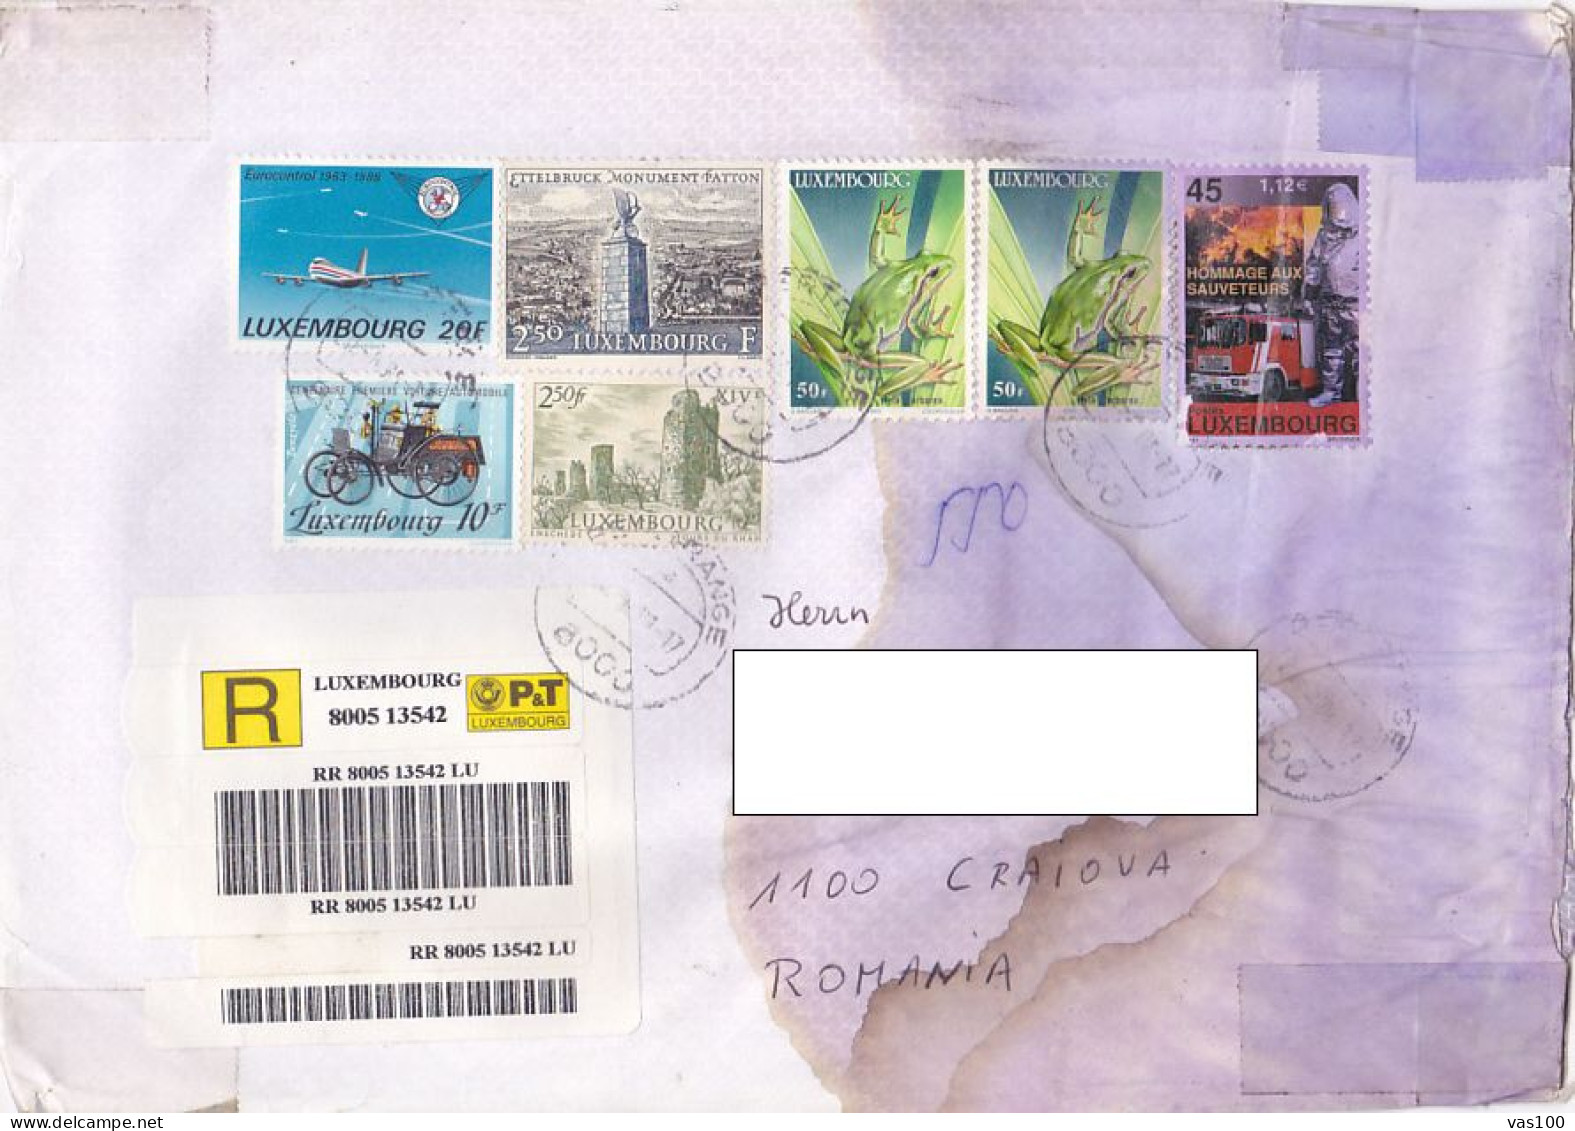 PLANE, FIRST CAR, MONUMENT, TOWER, FROG, FIREFIGHTERS, STAMPS ON REGISTERED COVER, 2001, LUXEMBOURG - Storia Postale